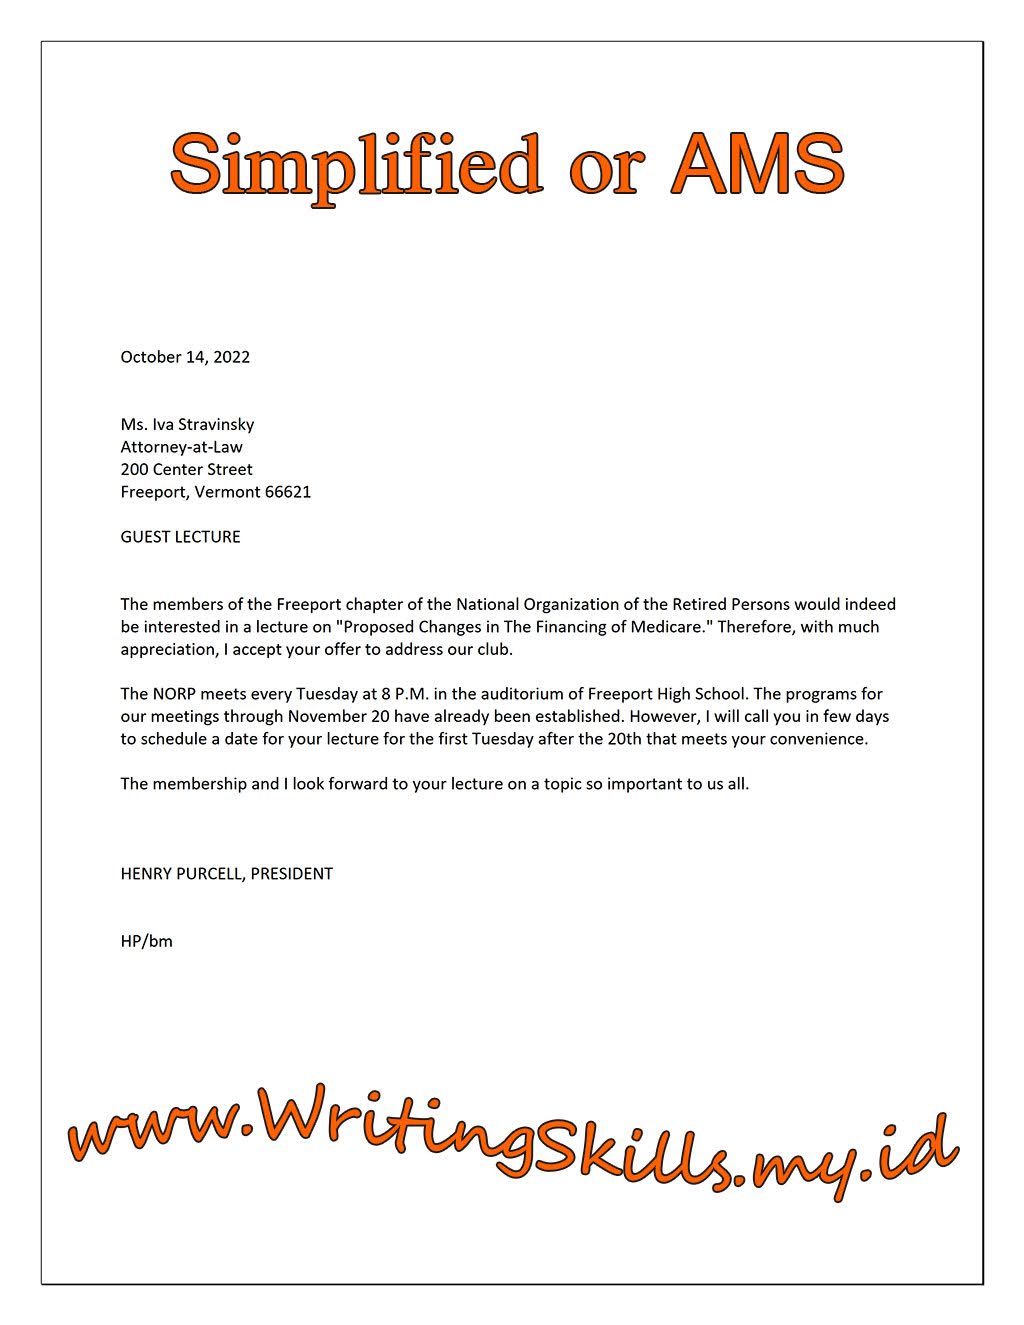 simplified-or-ams-layout-format-of-business-letters-example-my